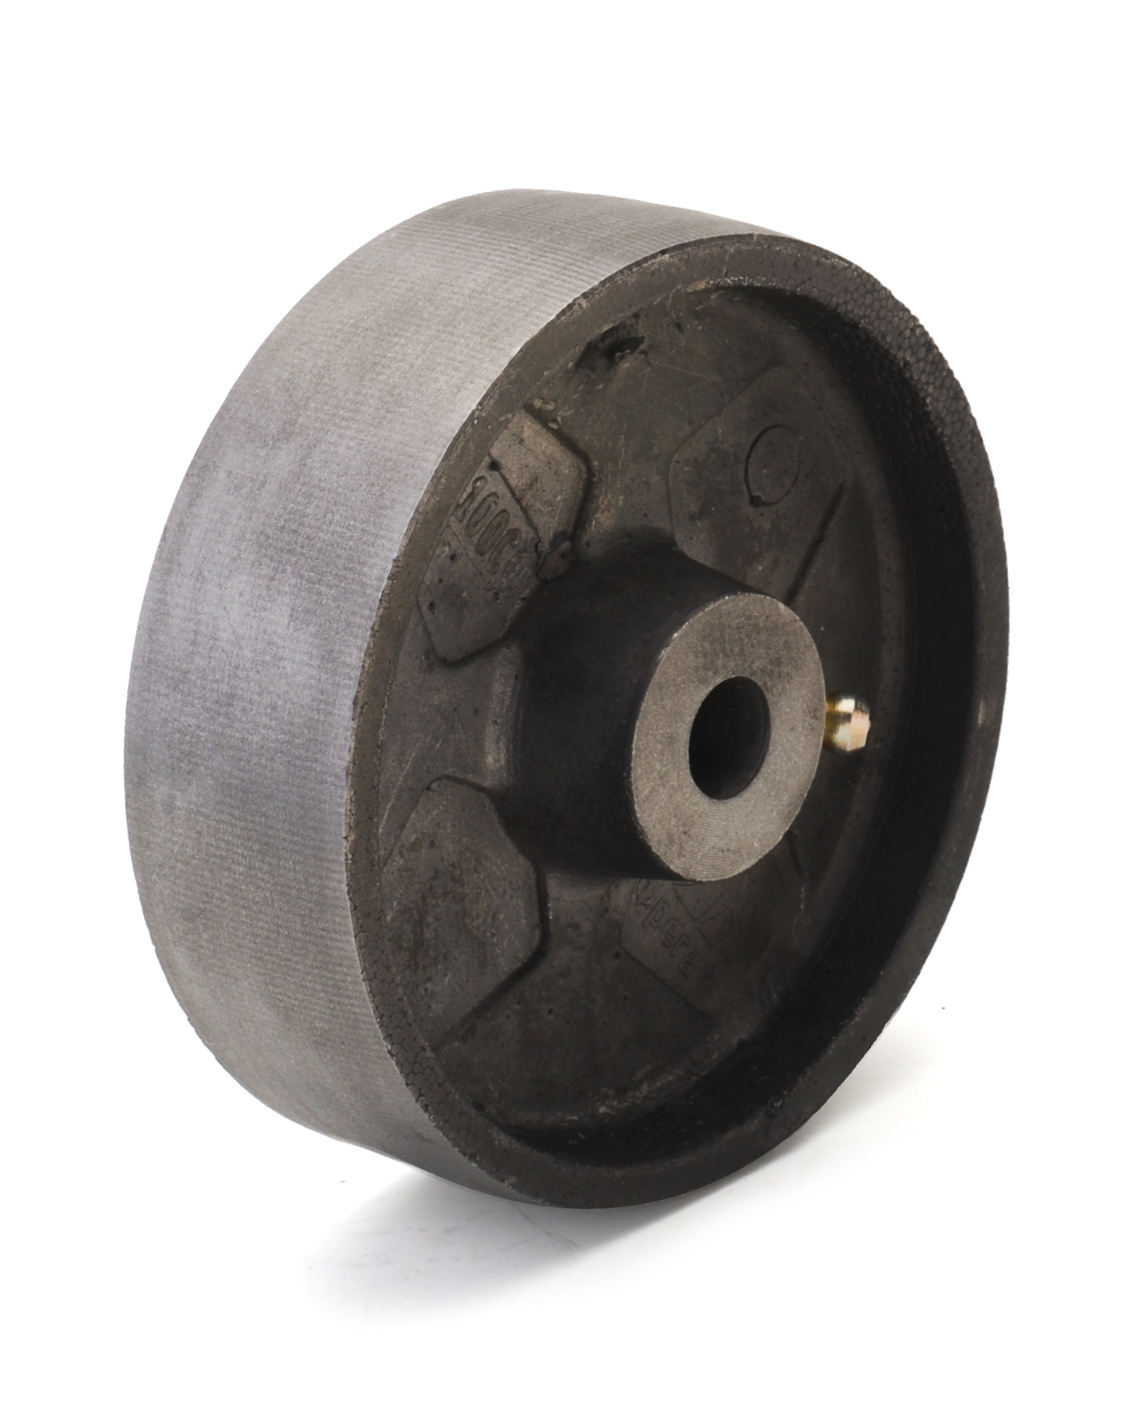 Wheel of grey cast iron. The wheel is equipped with a grease fitting.